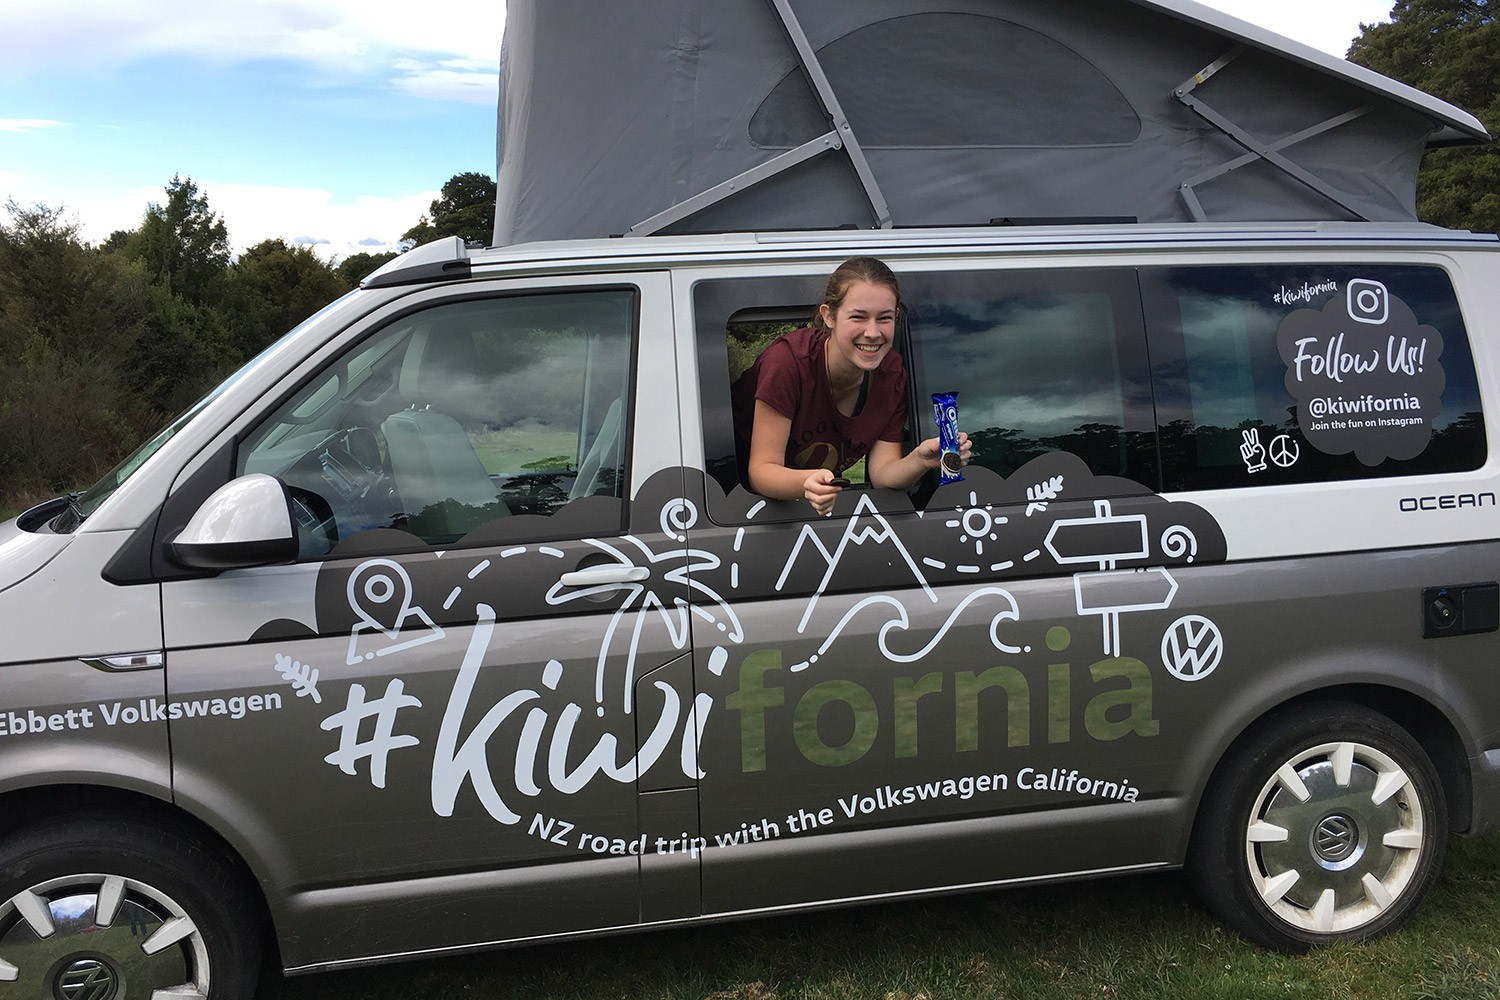 The team at Ebbett Volkswagen branded up a VW California, and gave each member of staff a week to enjoy it with their friends and families, then captured their stories on the great “Kiwifornia” road trip.